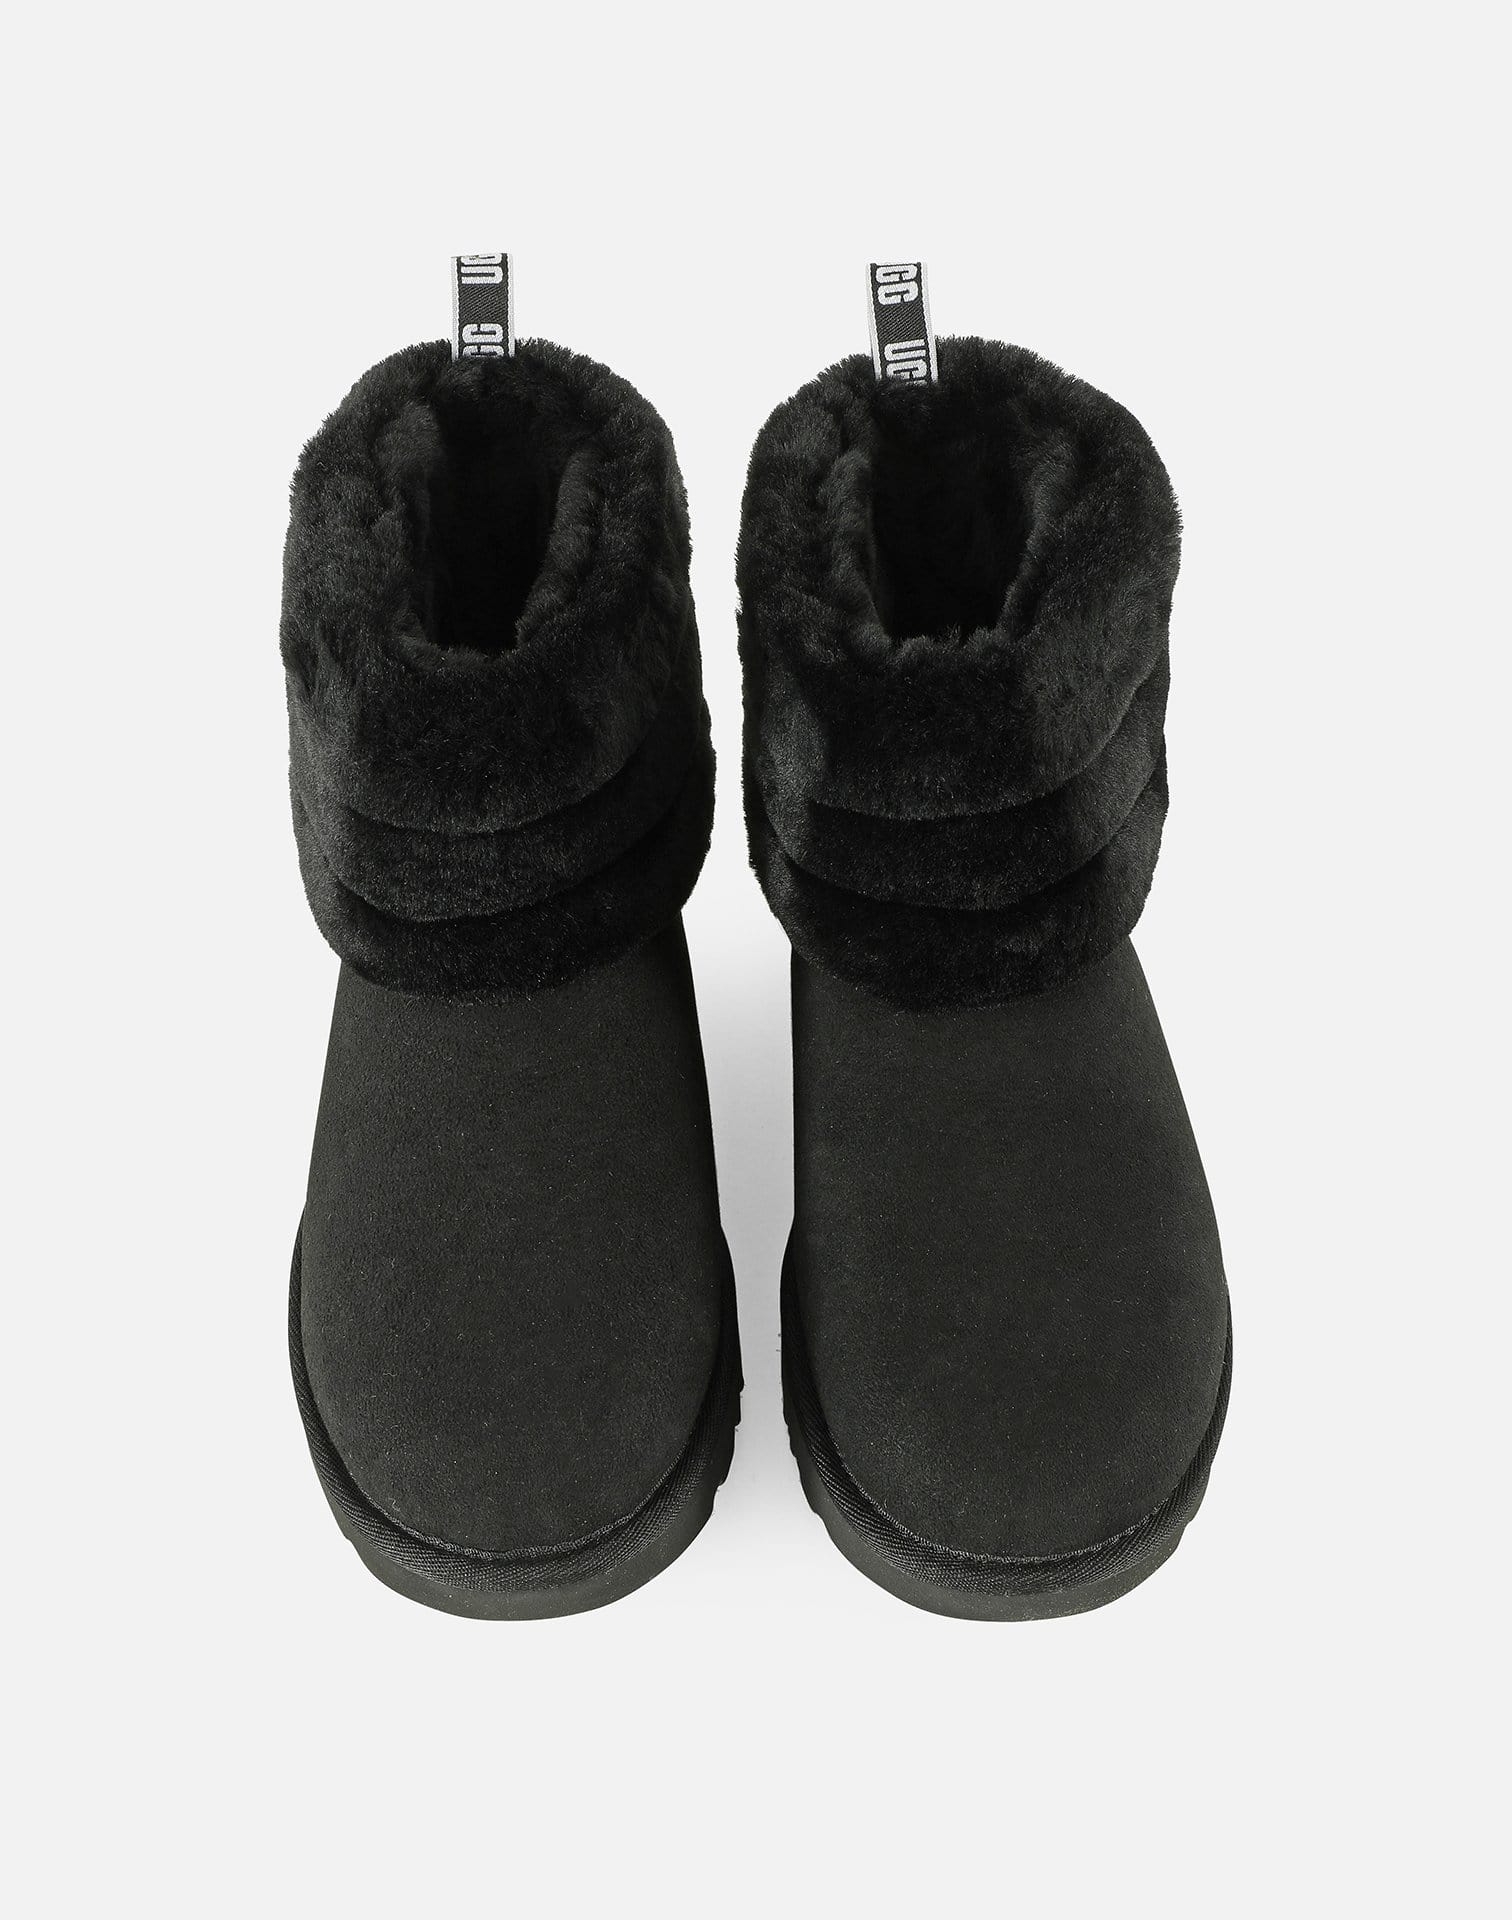 UGG Women's Classic Mini Fluff Quilted Boots